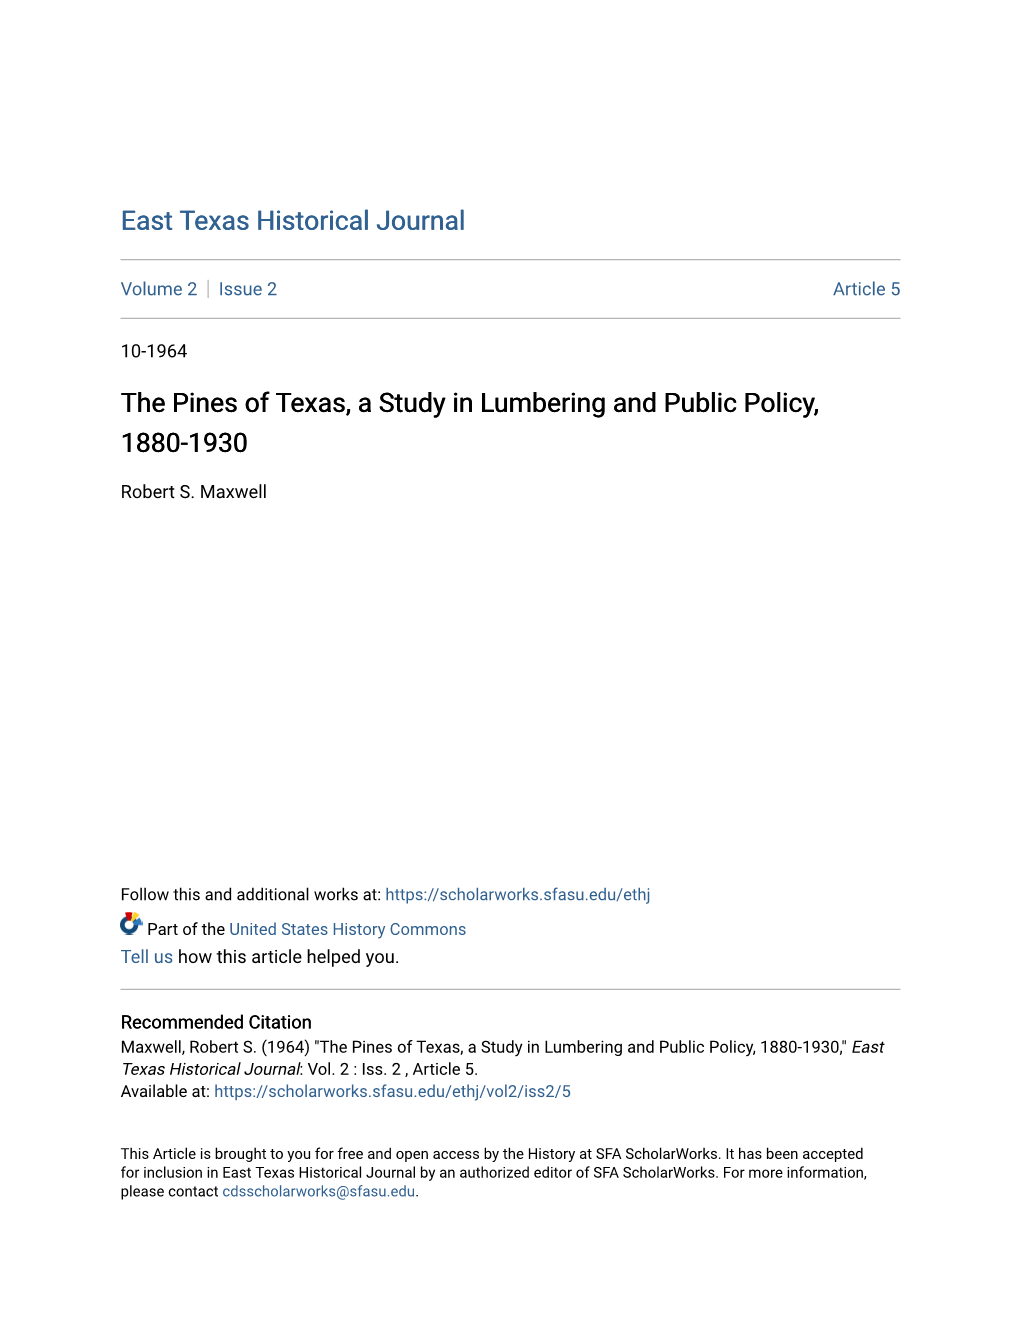 The Pines of Texas, a Study in Lumbering and Public Policy, 1880-1930